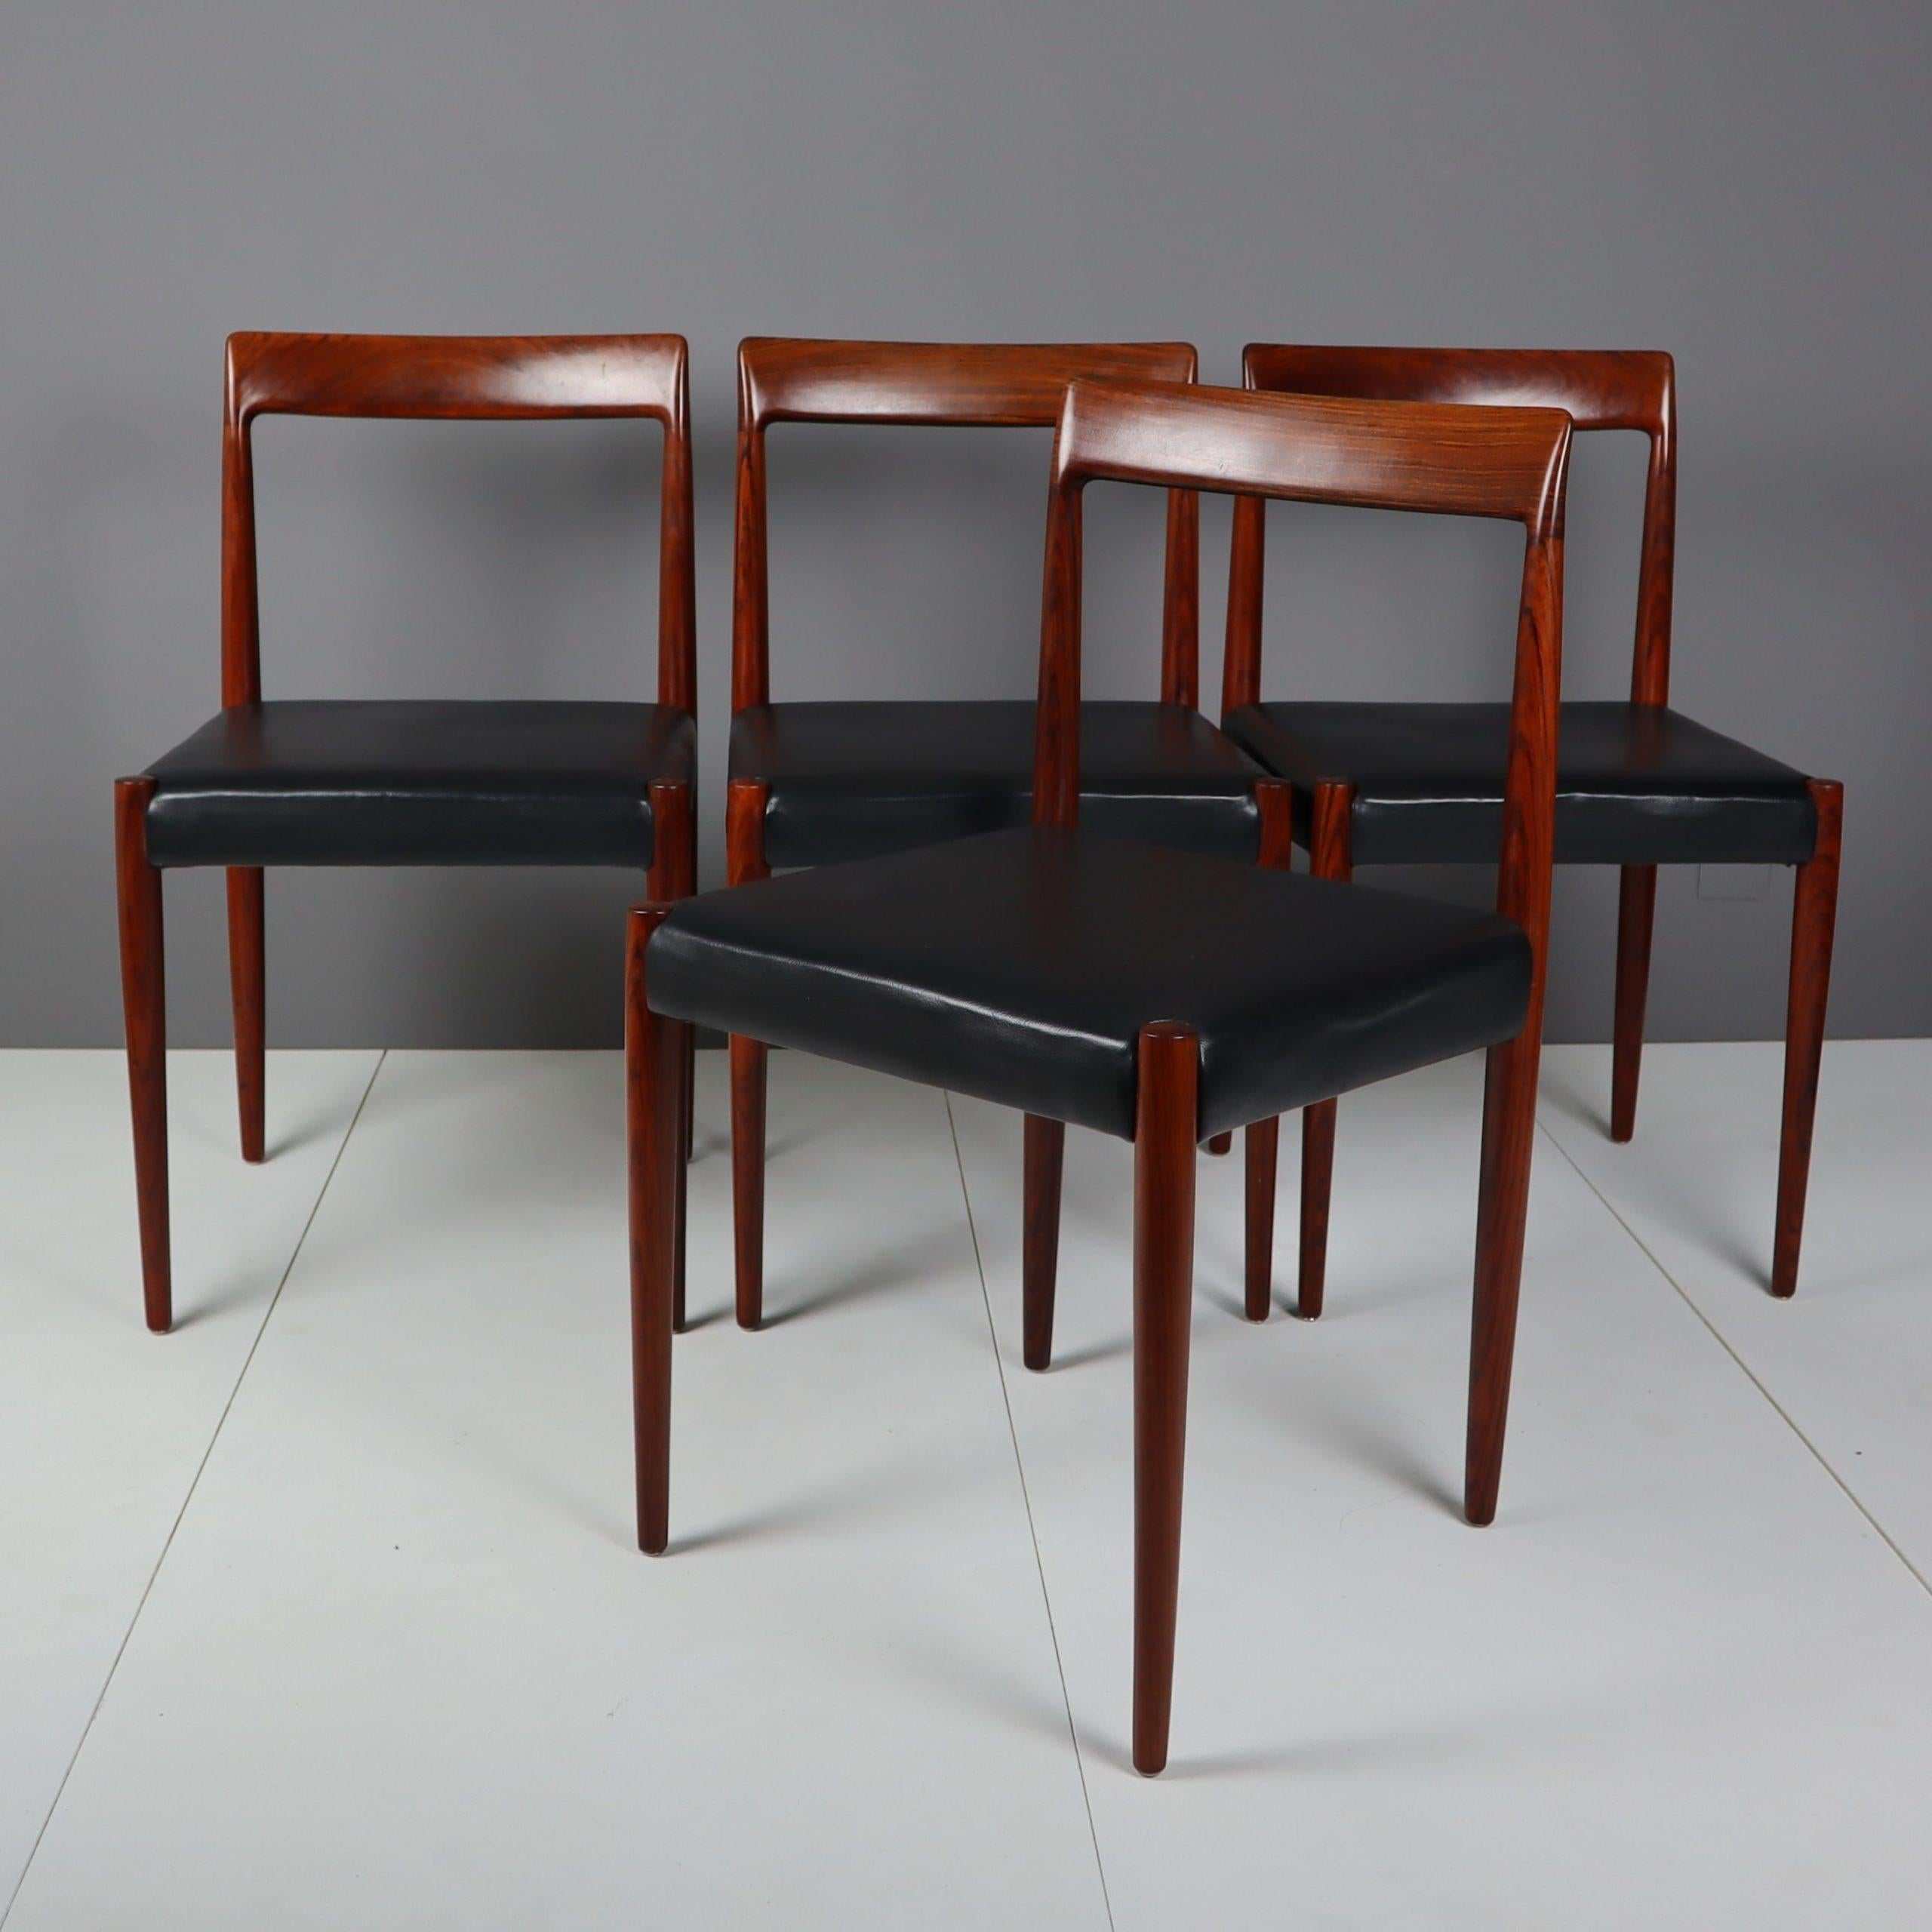 German Midcentury Rosewood Chairs from Lübke For Sale